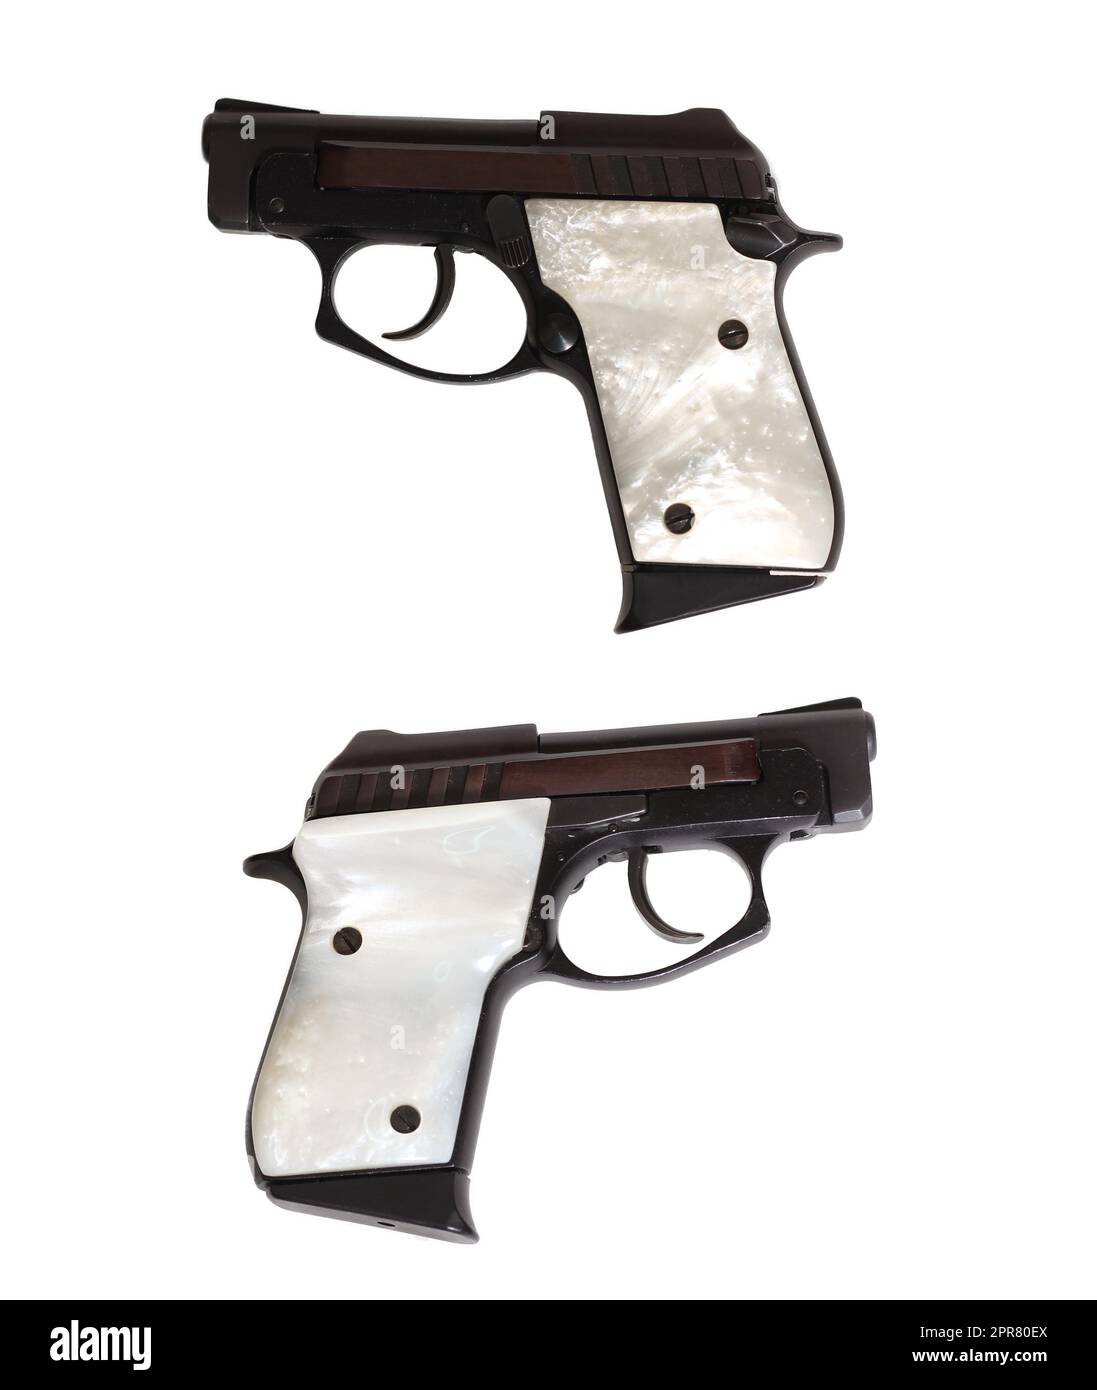 Small Black 22 Caliber Handgun With Pearl Grips On White Background Stock Photo